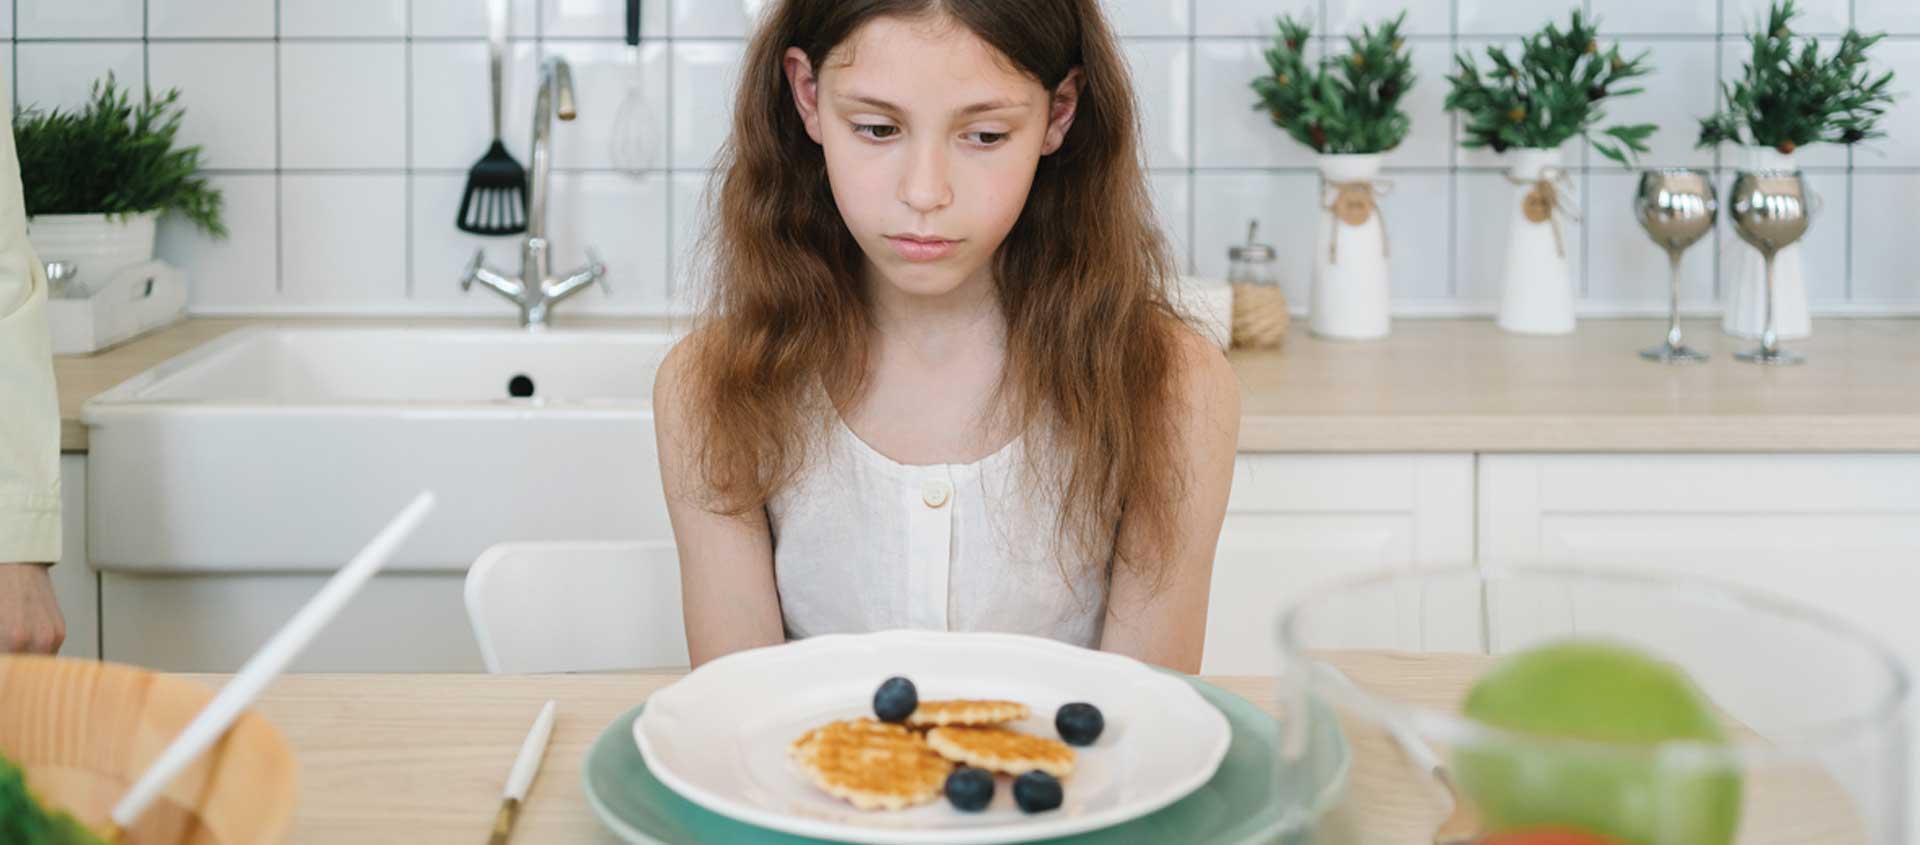 A school-aged girl sits in front of a plate of waffles with a sad look